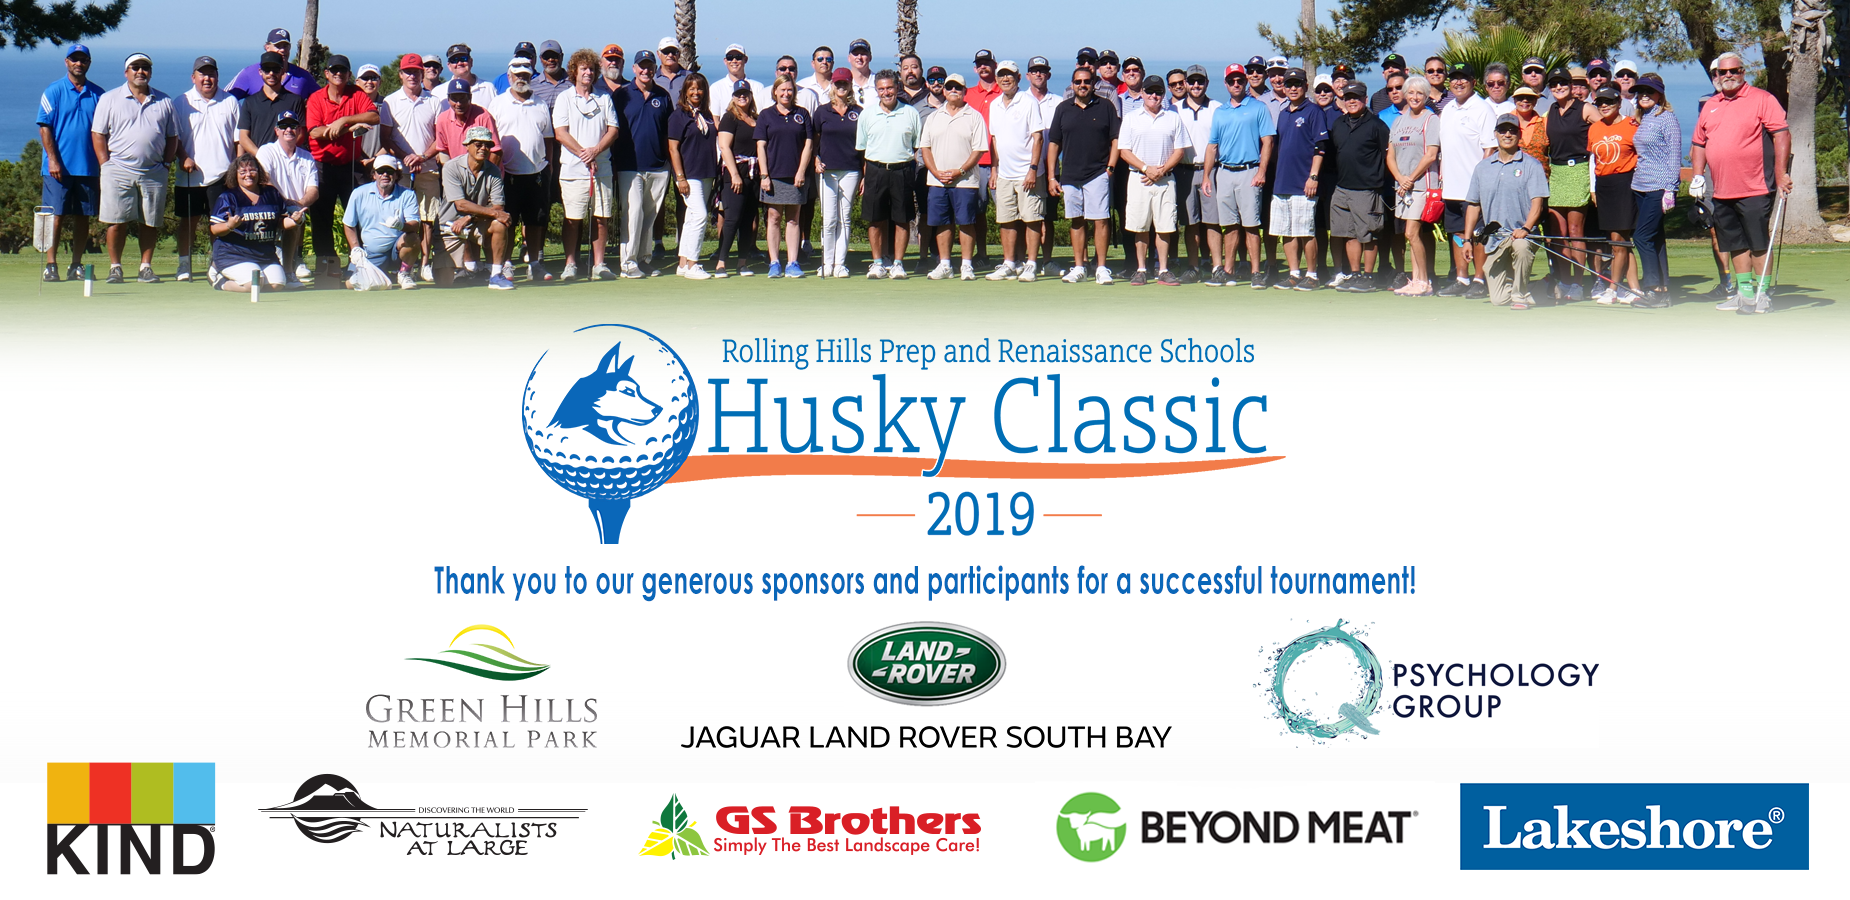 Thank you for supporting the 2019 Husky Classic!